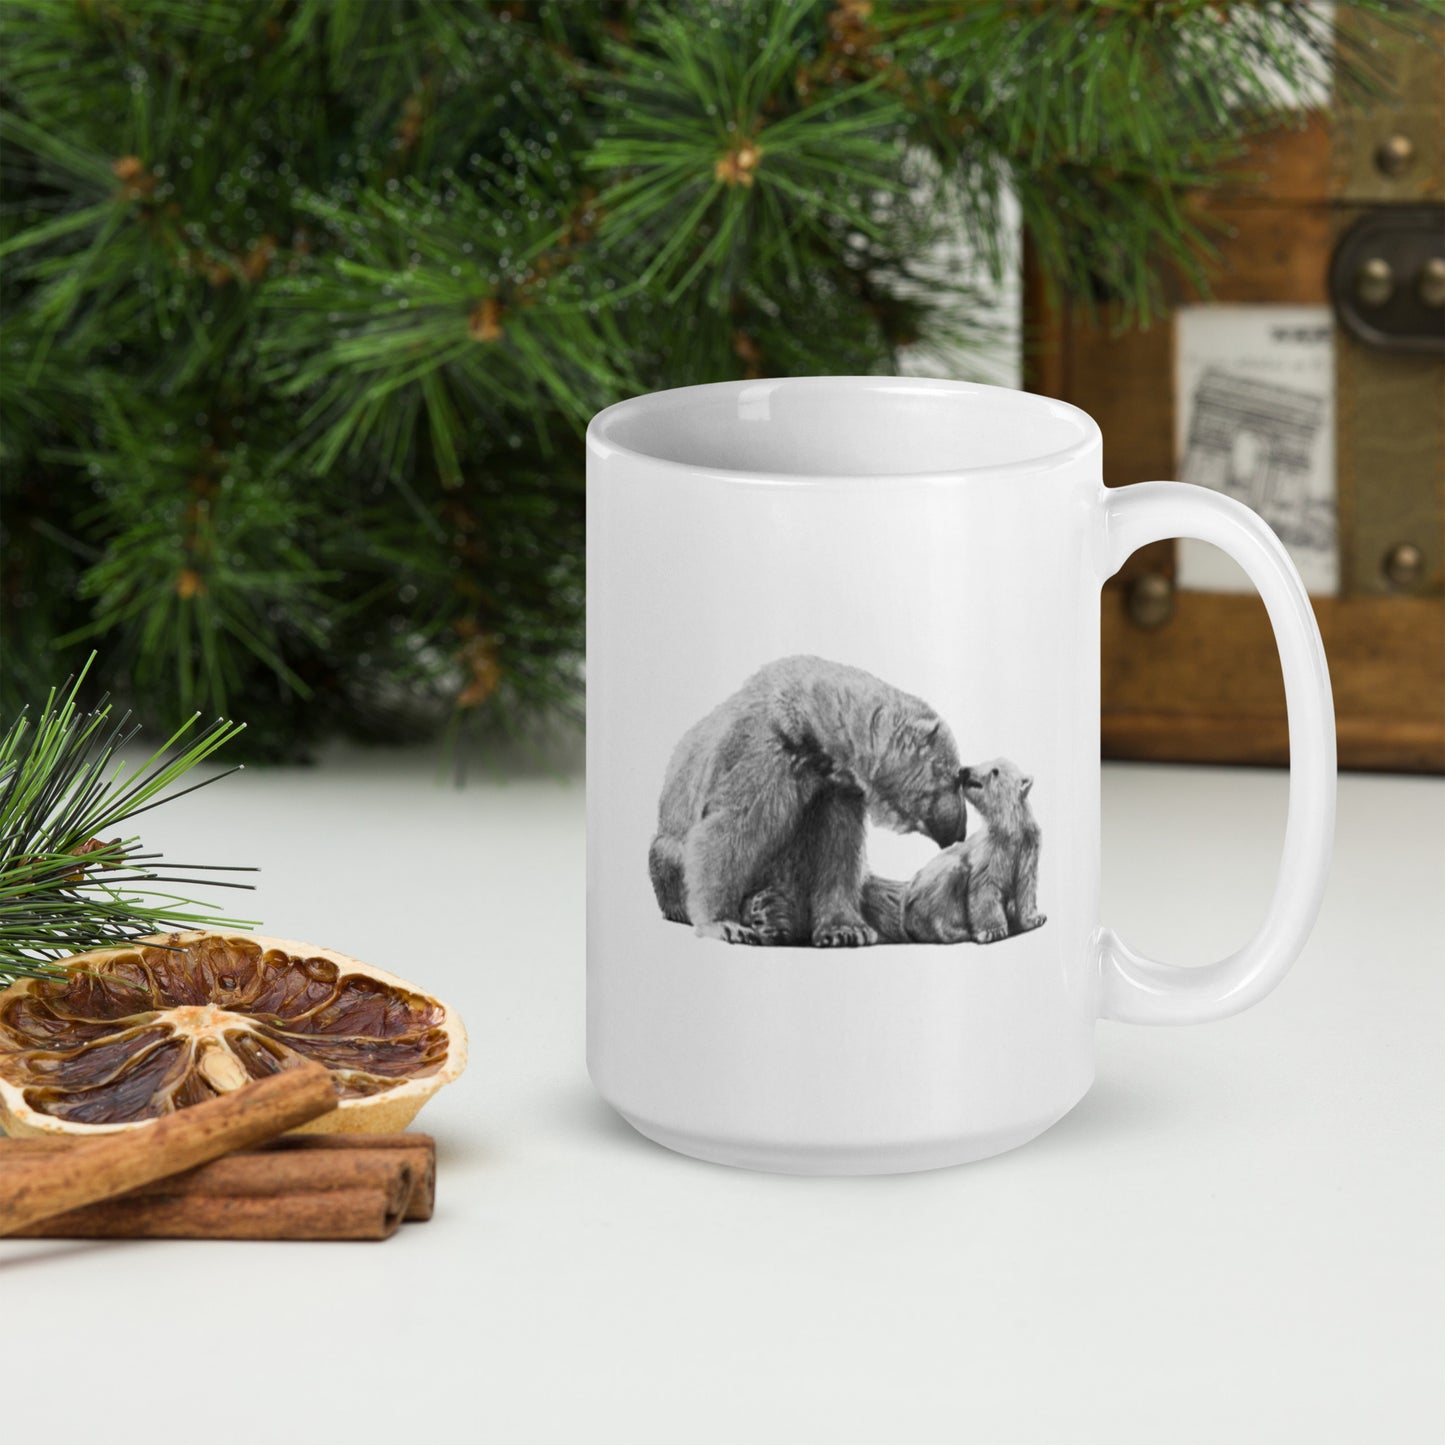 This "Koala White Glossy Mug" is from a drawing of mine created with a graphite pencil. It has been digitally optimized and transferred to a 15oz white glossy mug.